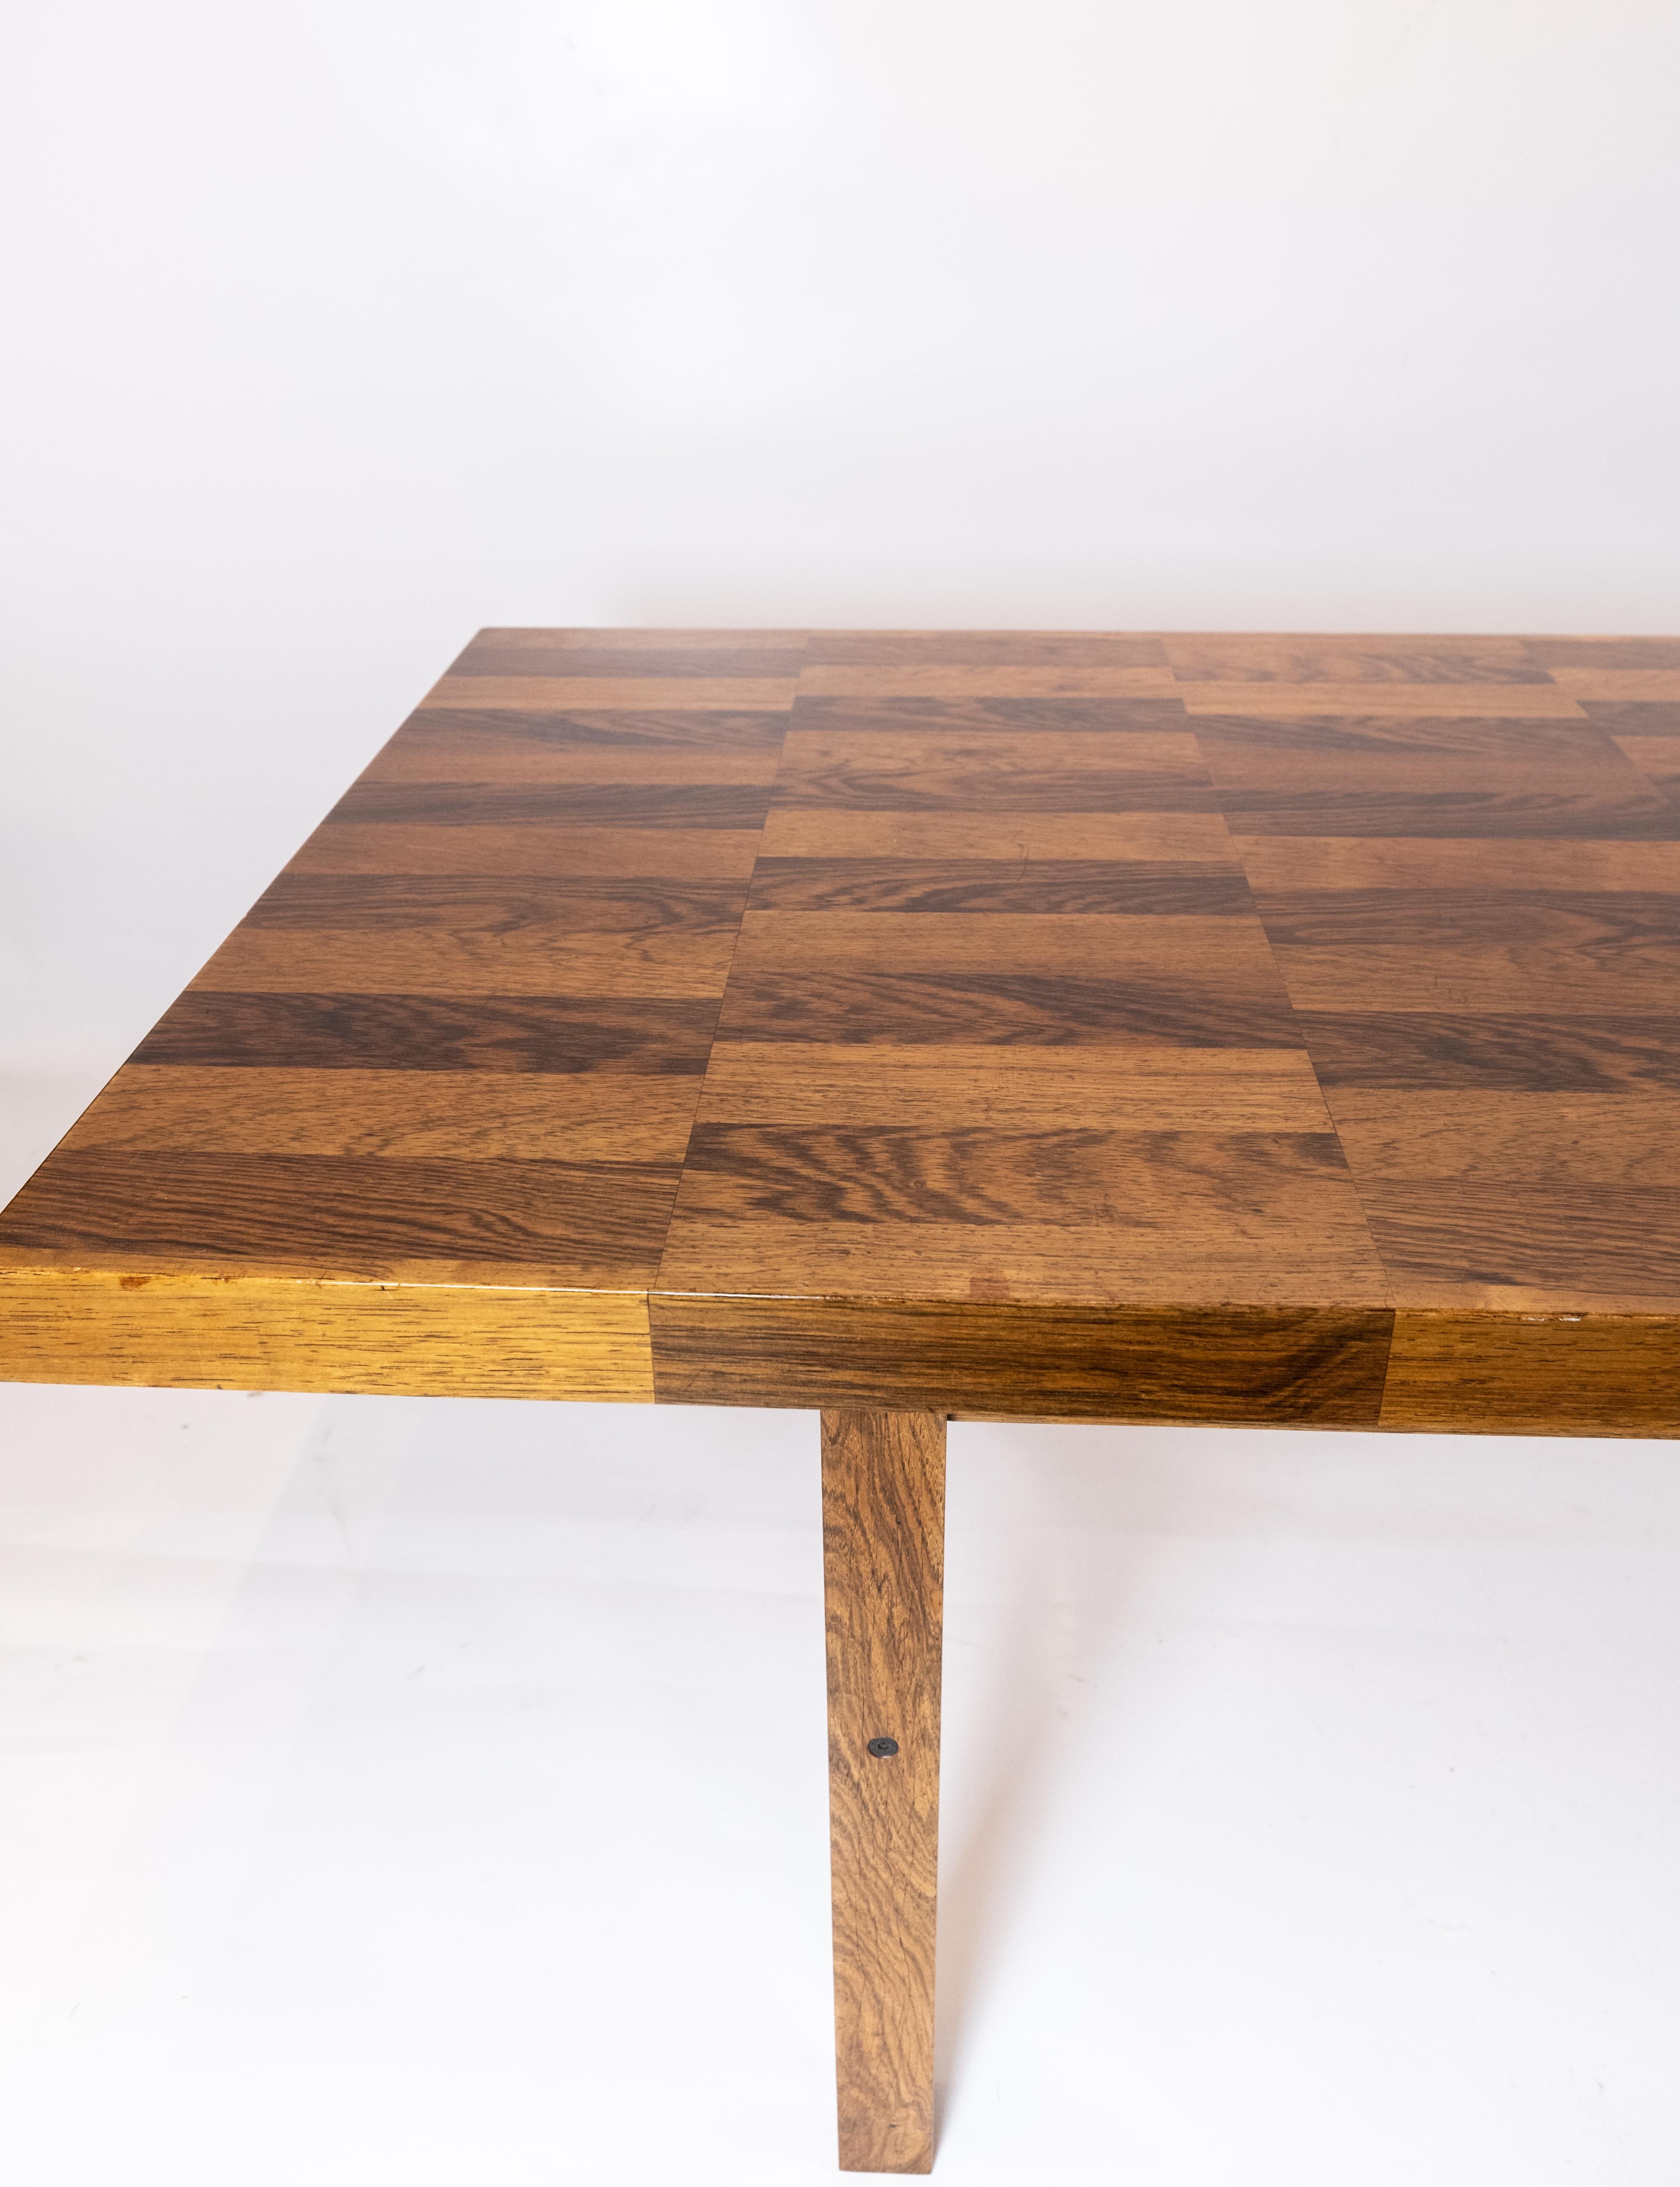 Scandinavian Modern Coffee Table in Rosewood of Danish Design Manufactured, 1967 For Sale